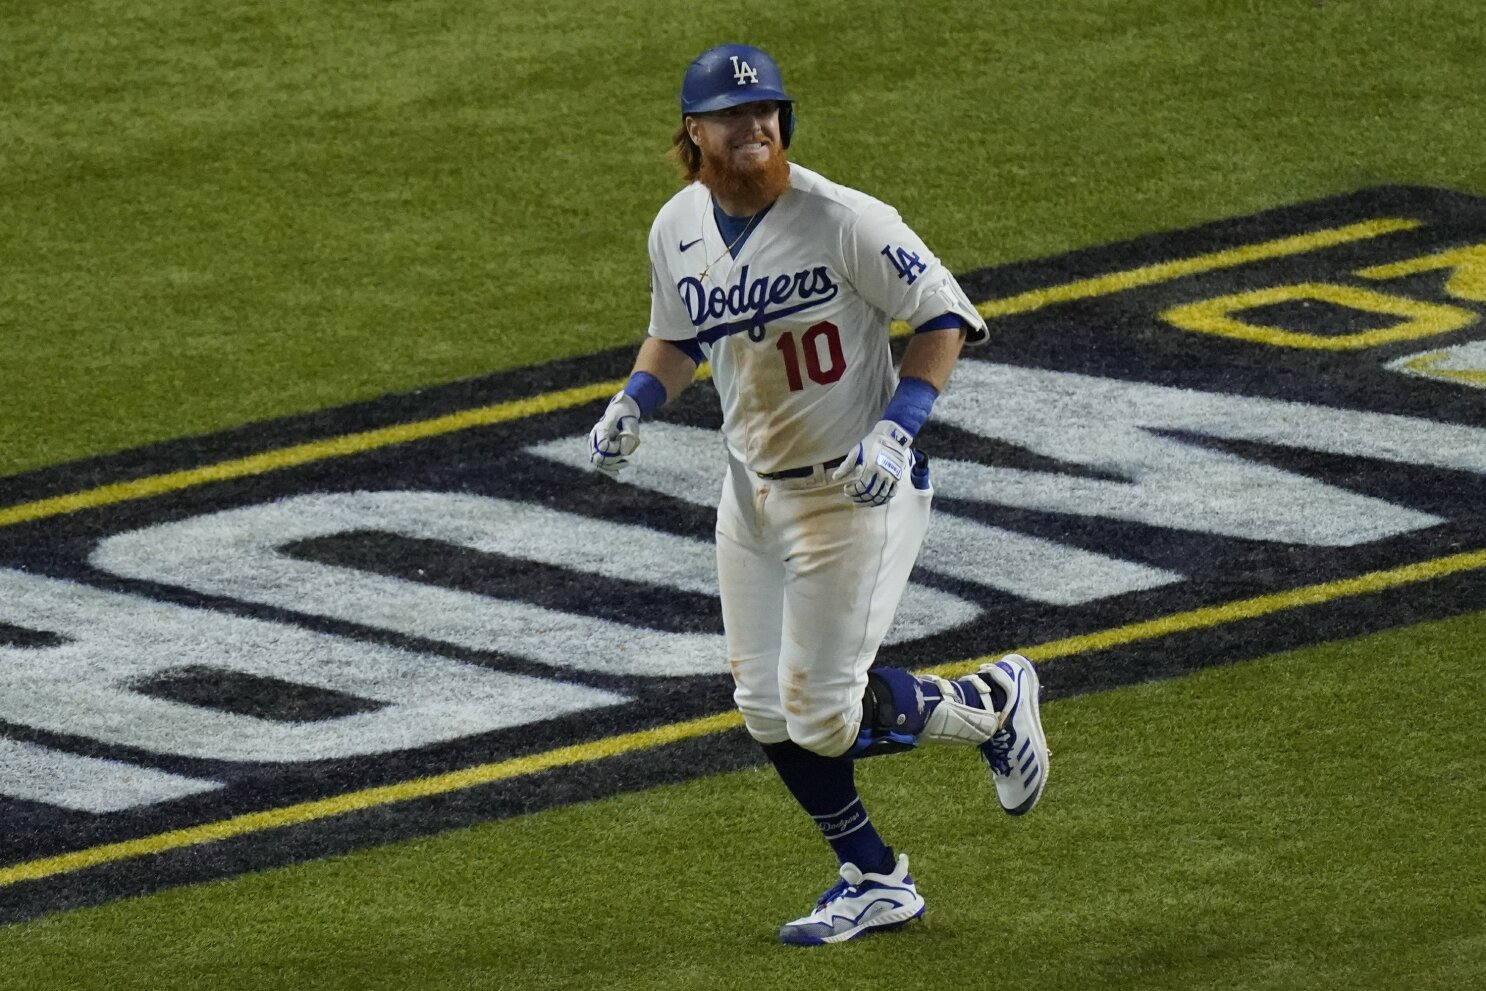 MLB investigating Dodgers player who left isolation to celebrate